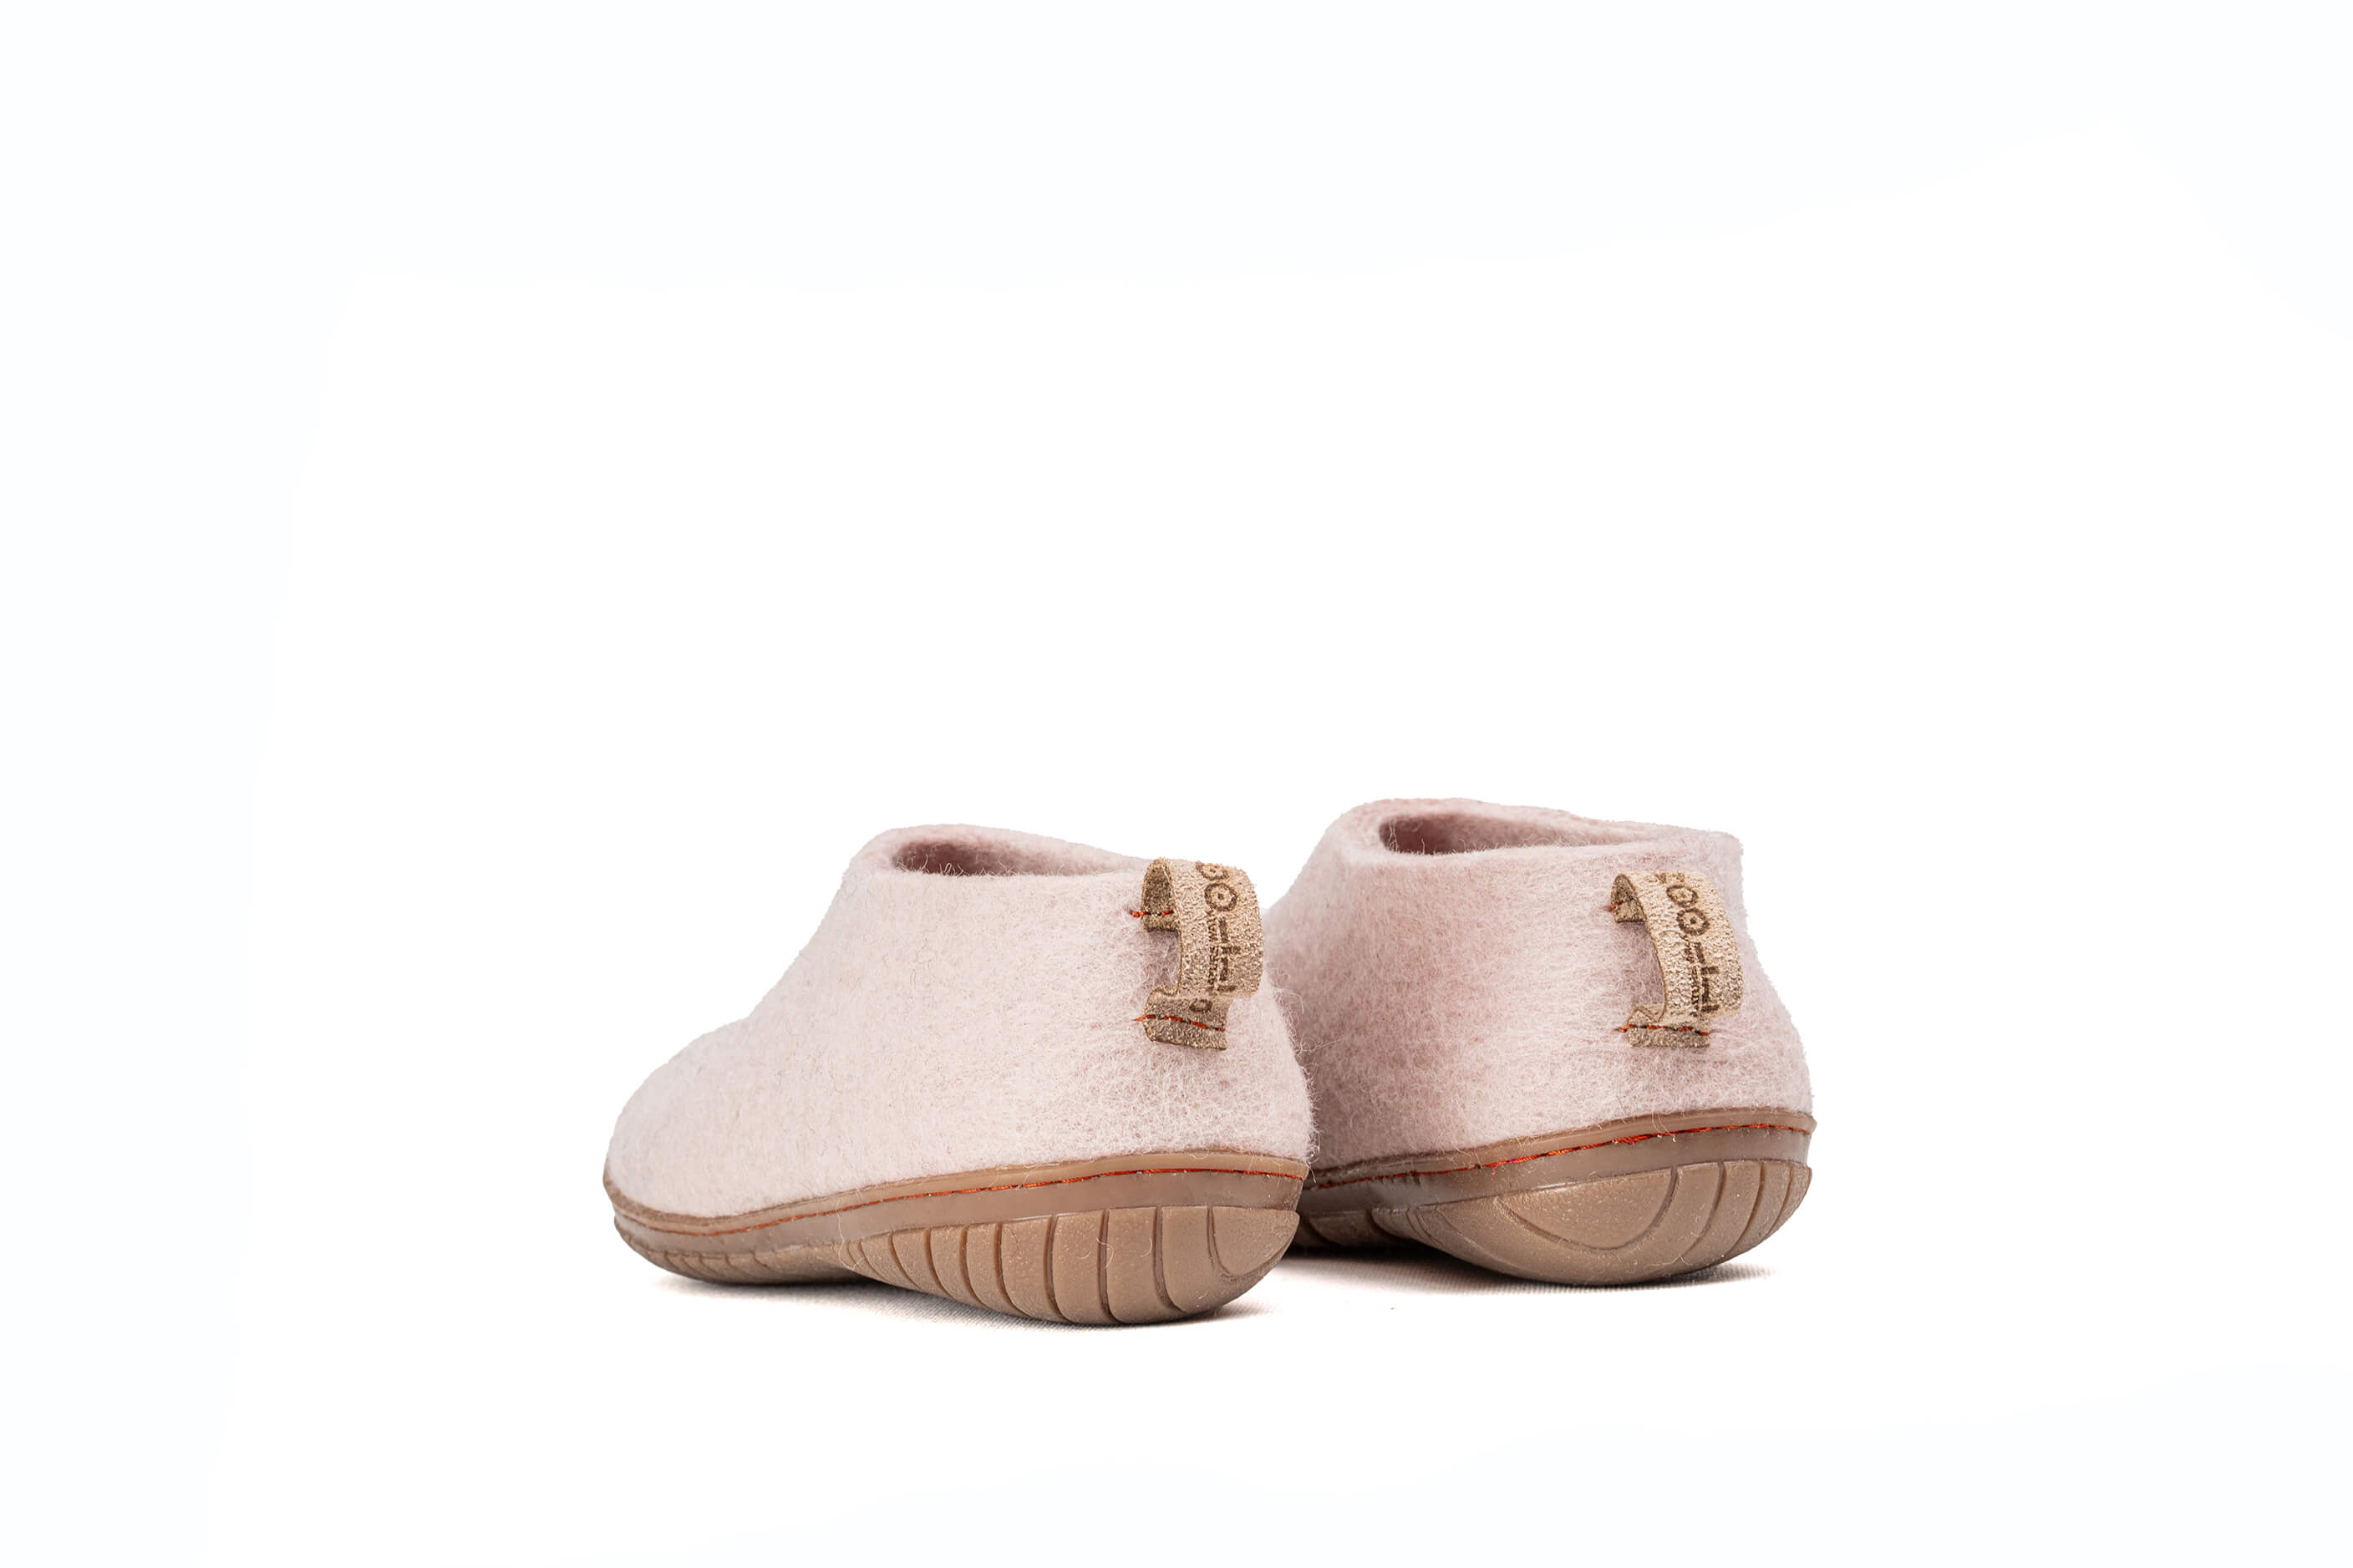 Outdoor Shoes With Rubber Sole - Baby Pink